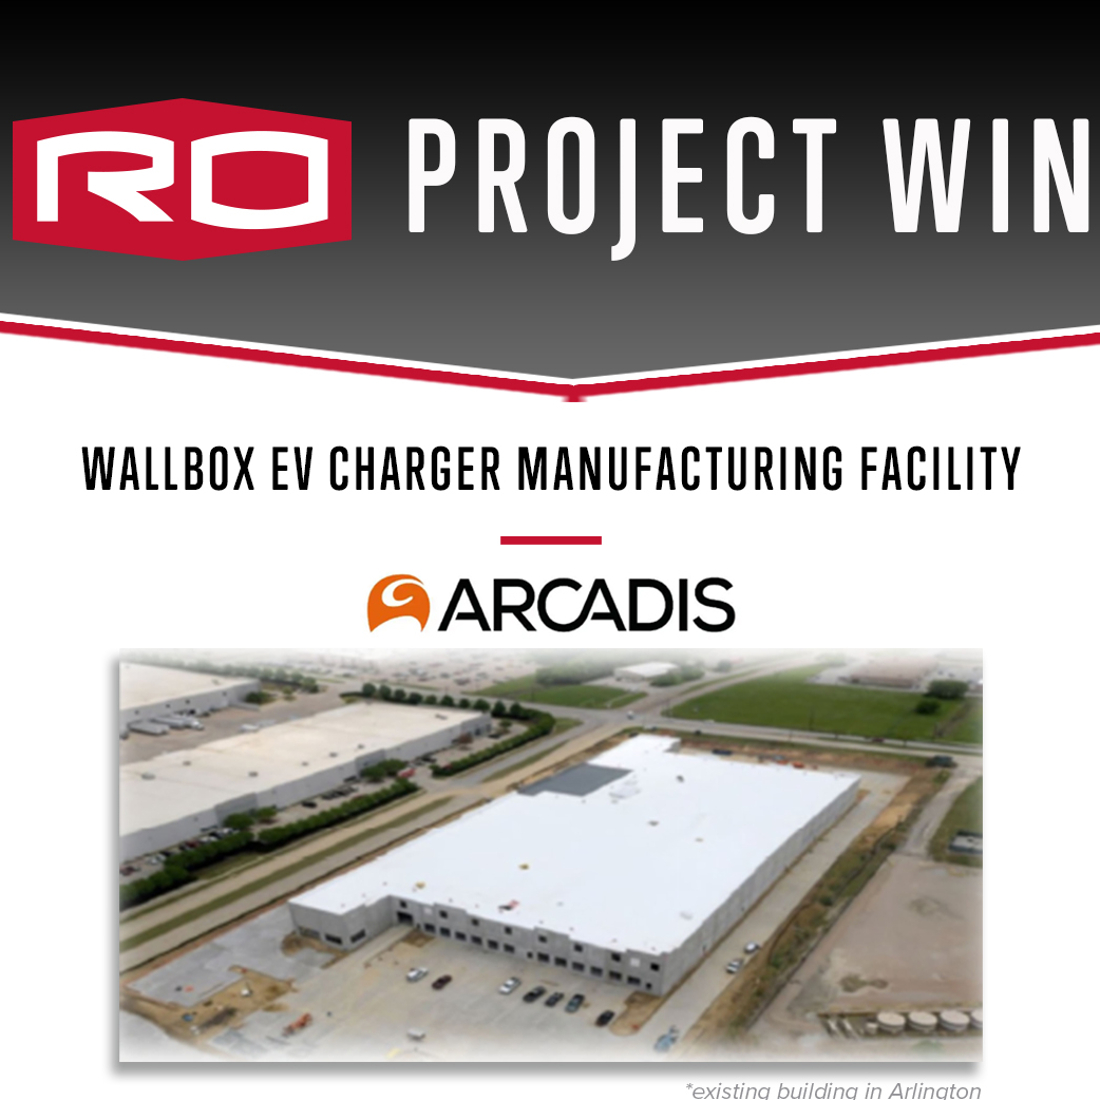 PROJECT WIN: WALLBOX EV CHARGER MANUFACTURING FACILITY